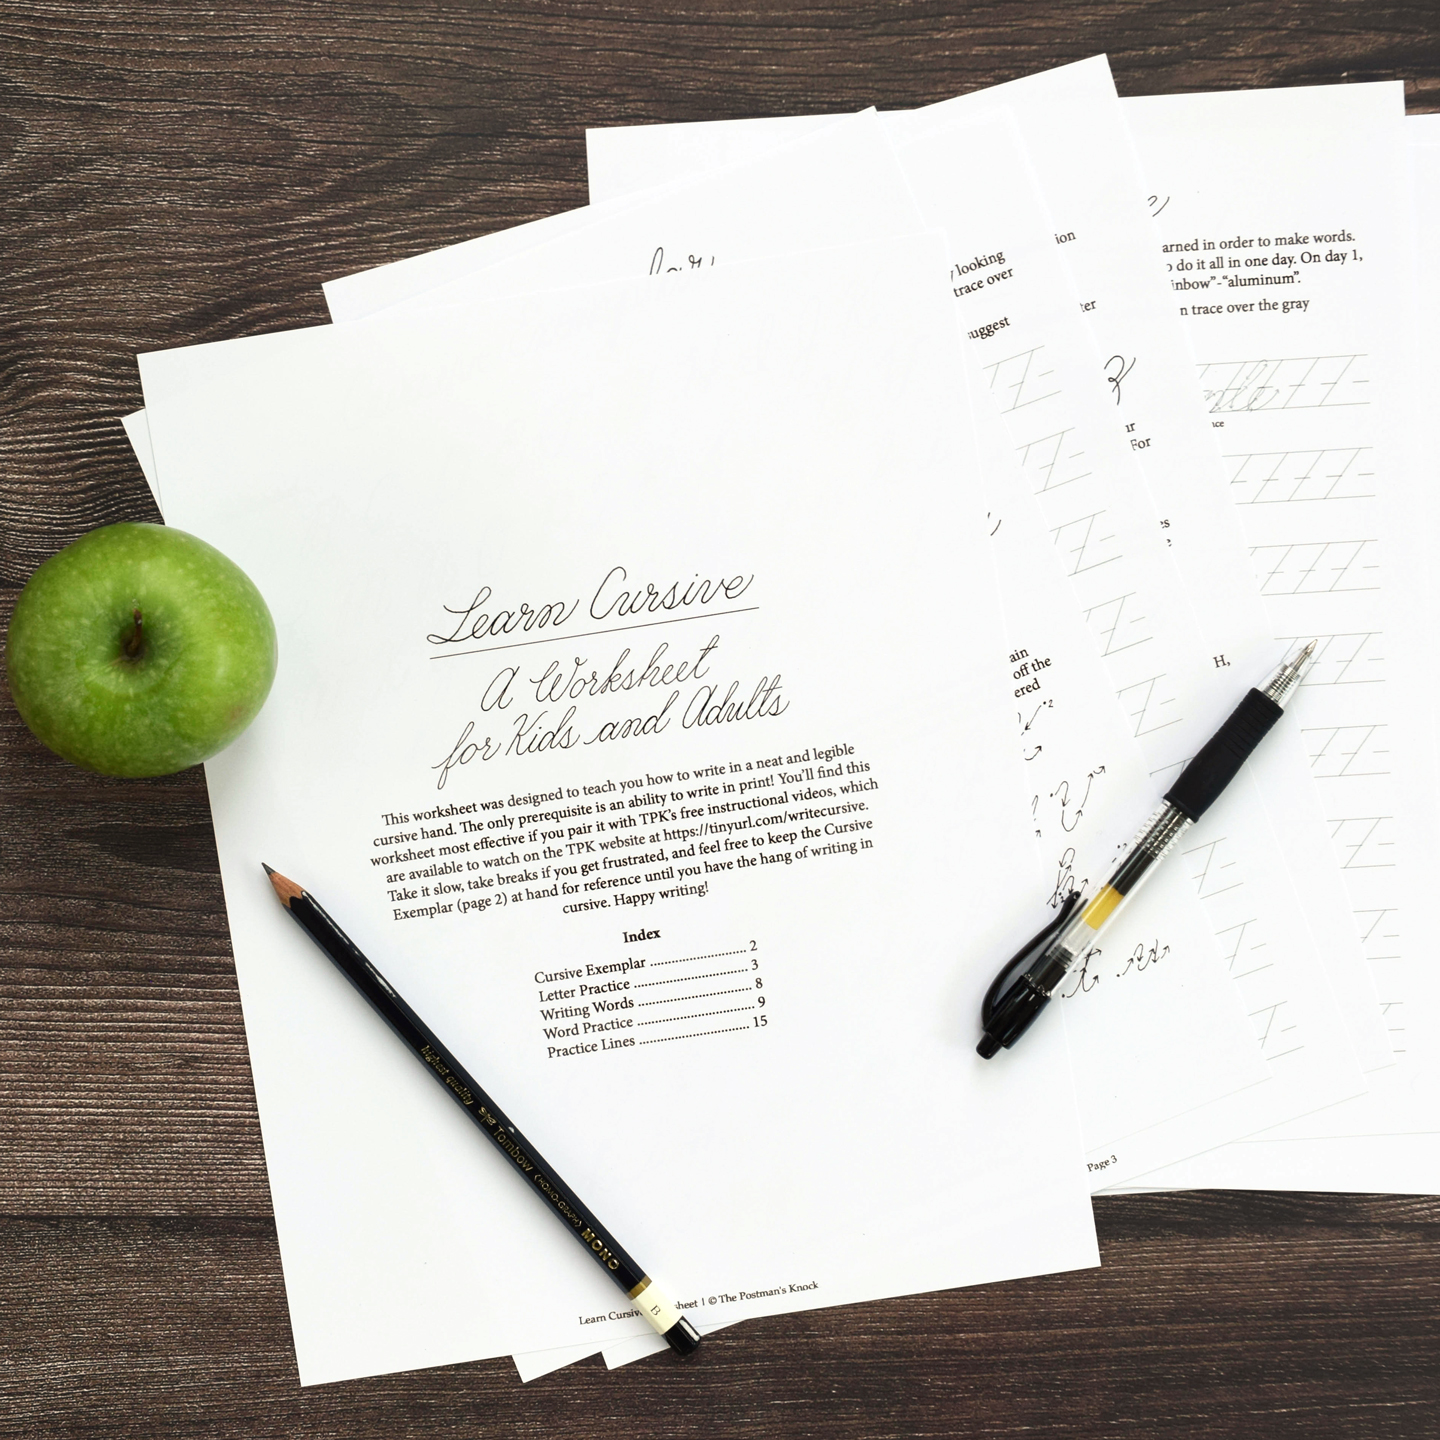 Learn Cursive Worksheet for Kids (and Adults!)